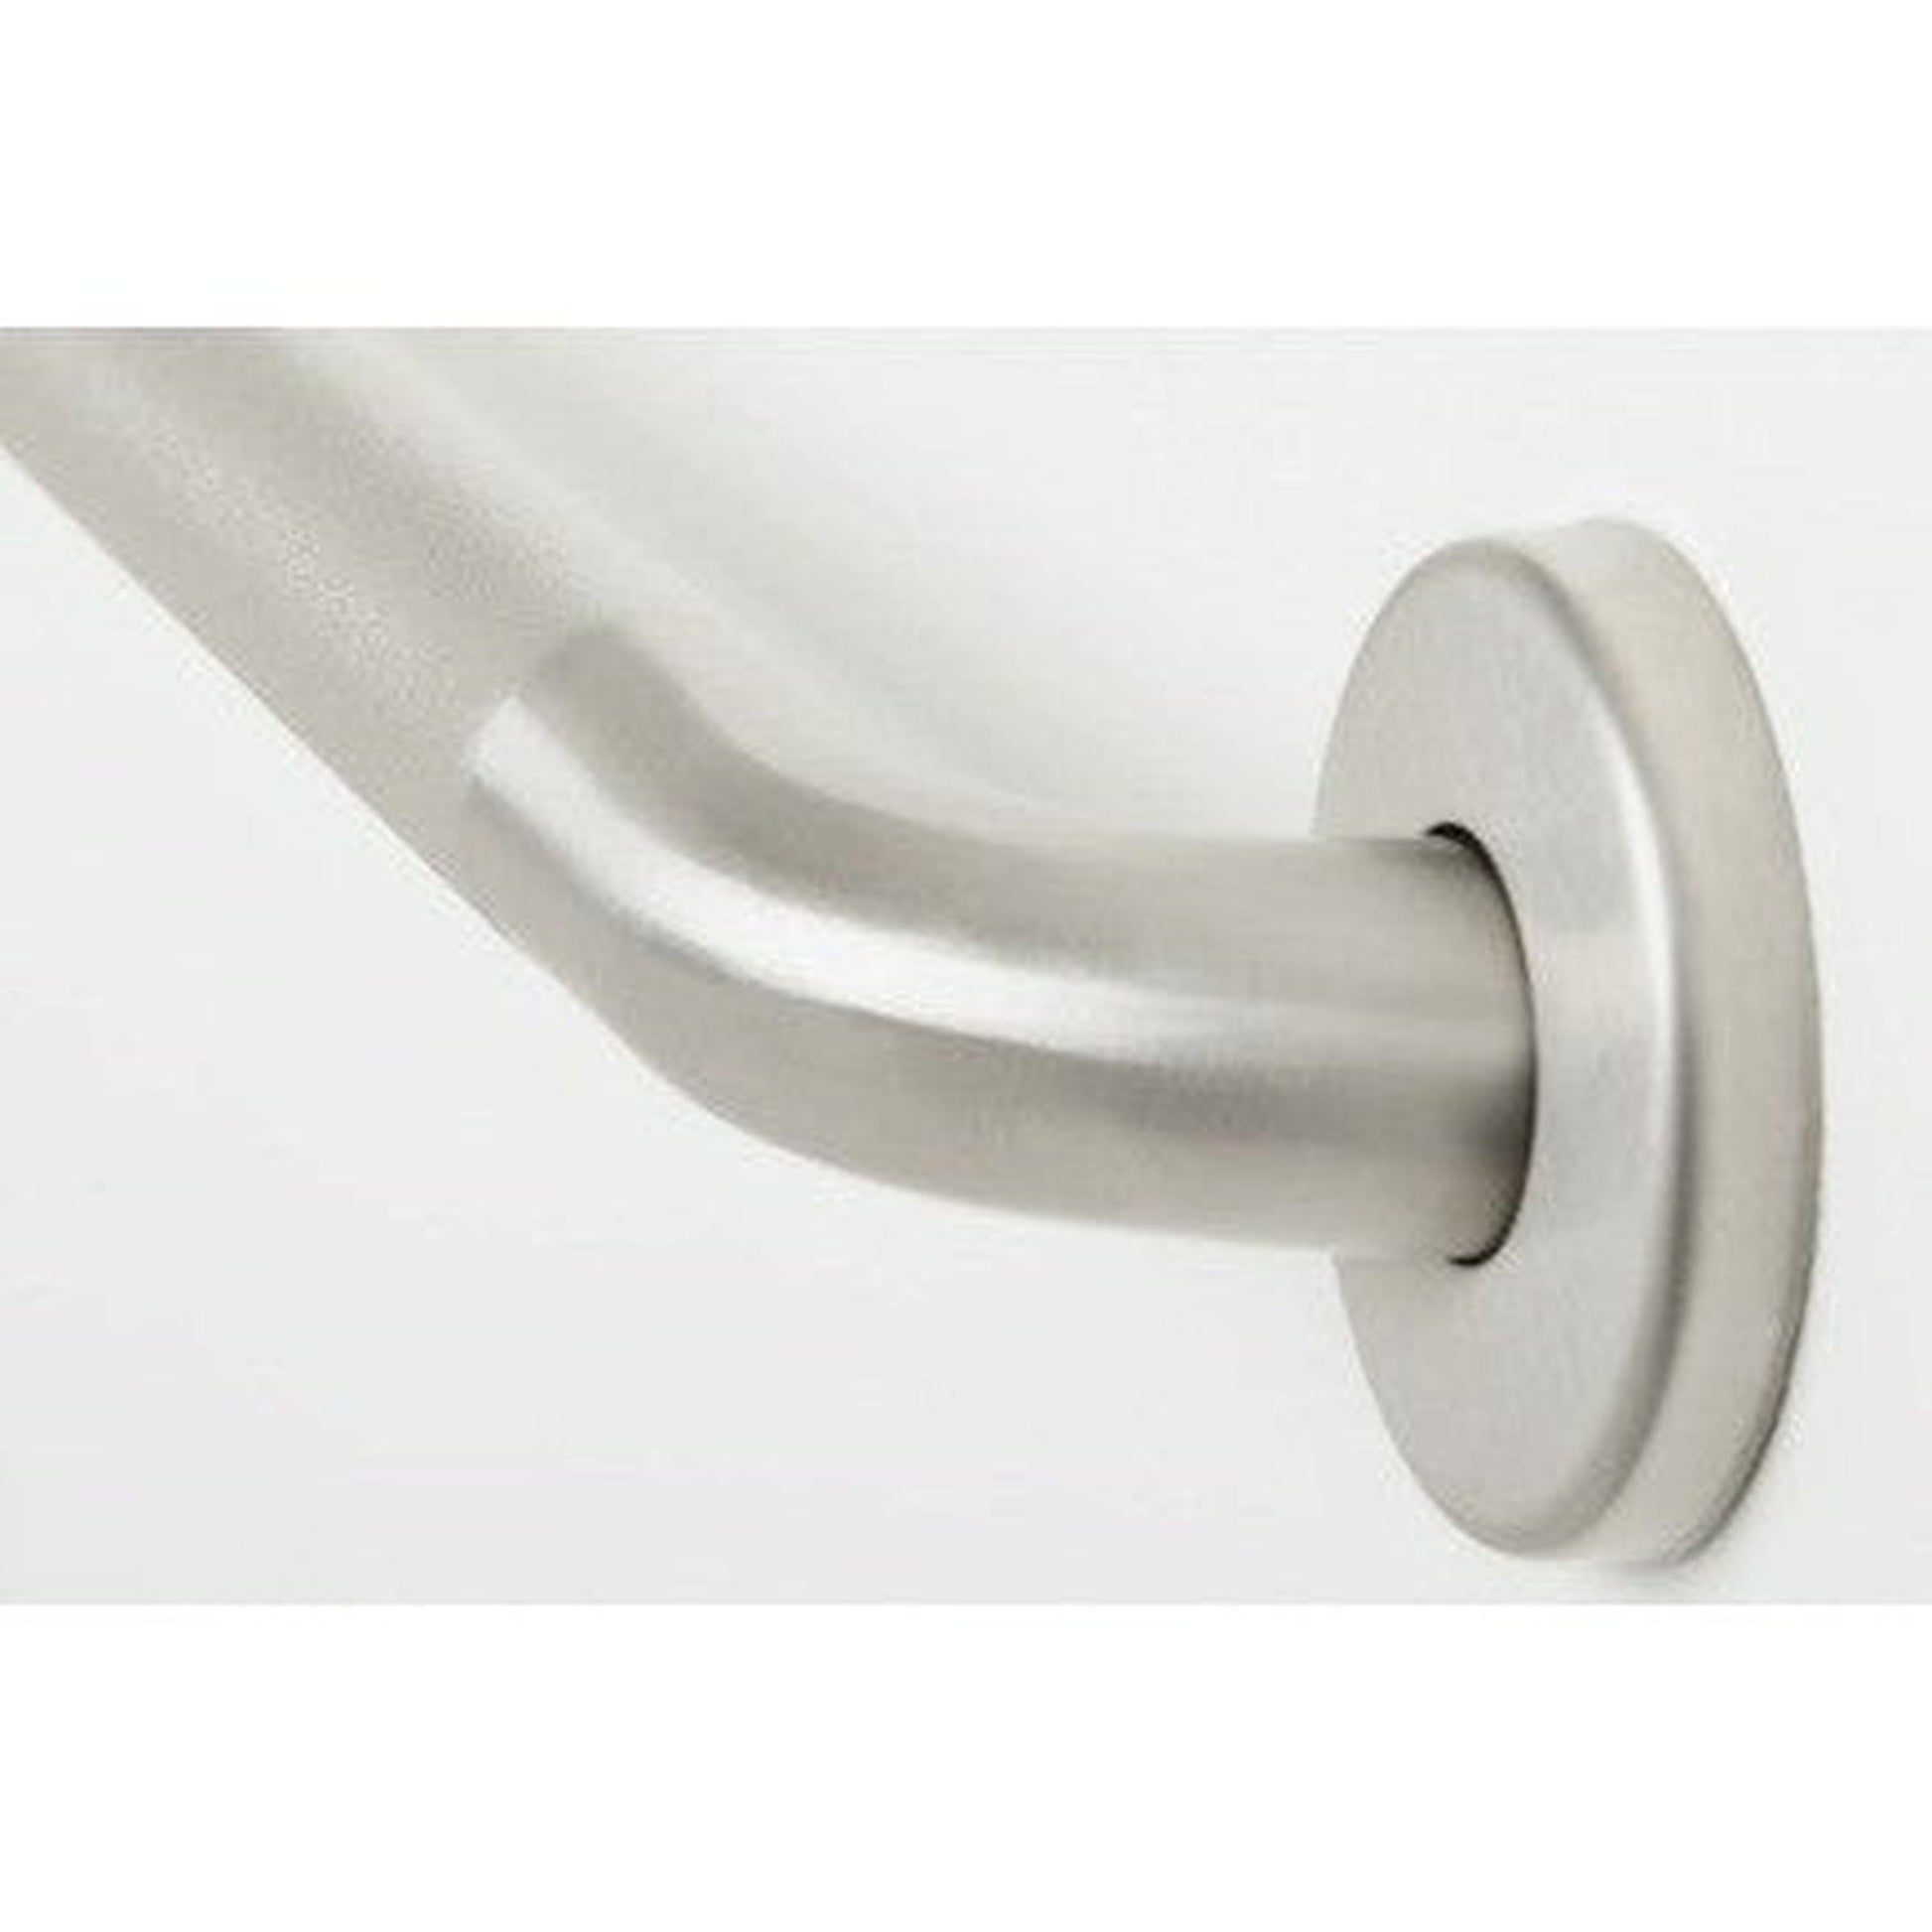 Seachrome Signature GY Series 16" Peened With Satin Stainless Steel Ends 1.5" Tube Diameter Straight Grab Bar